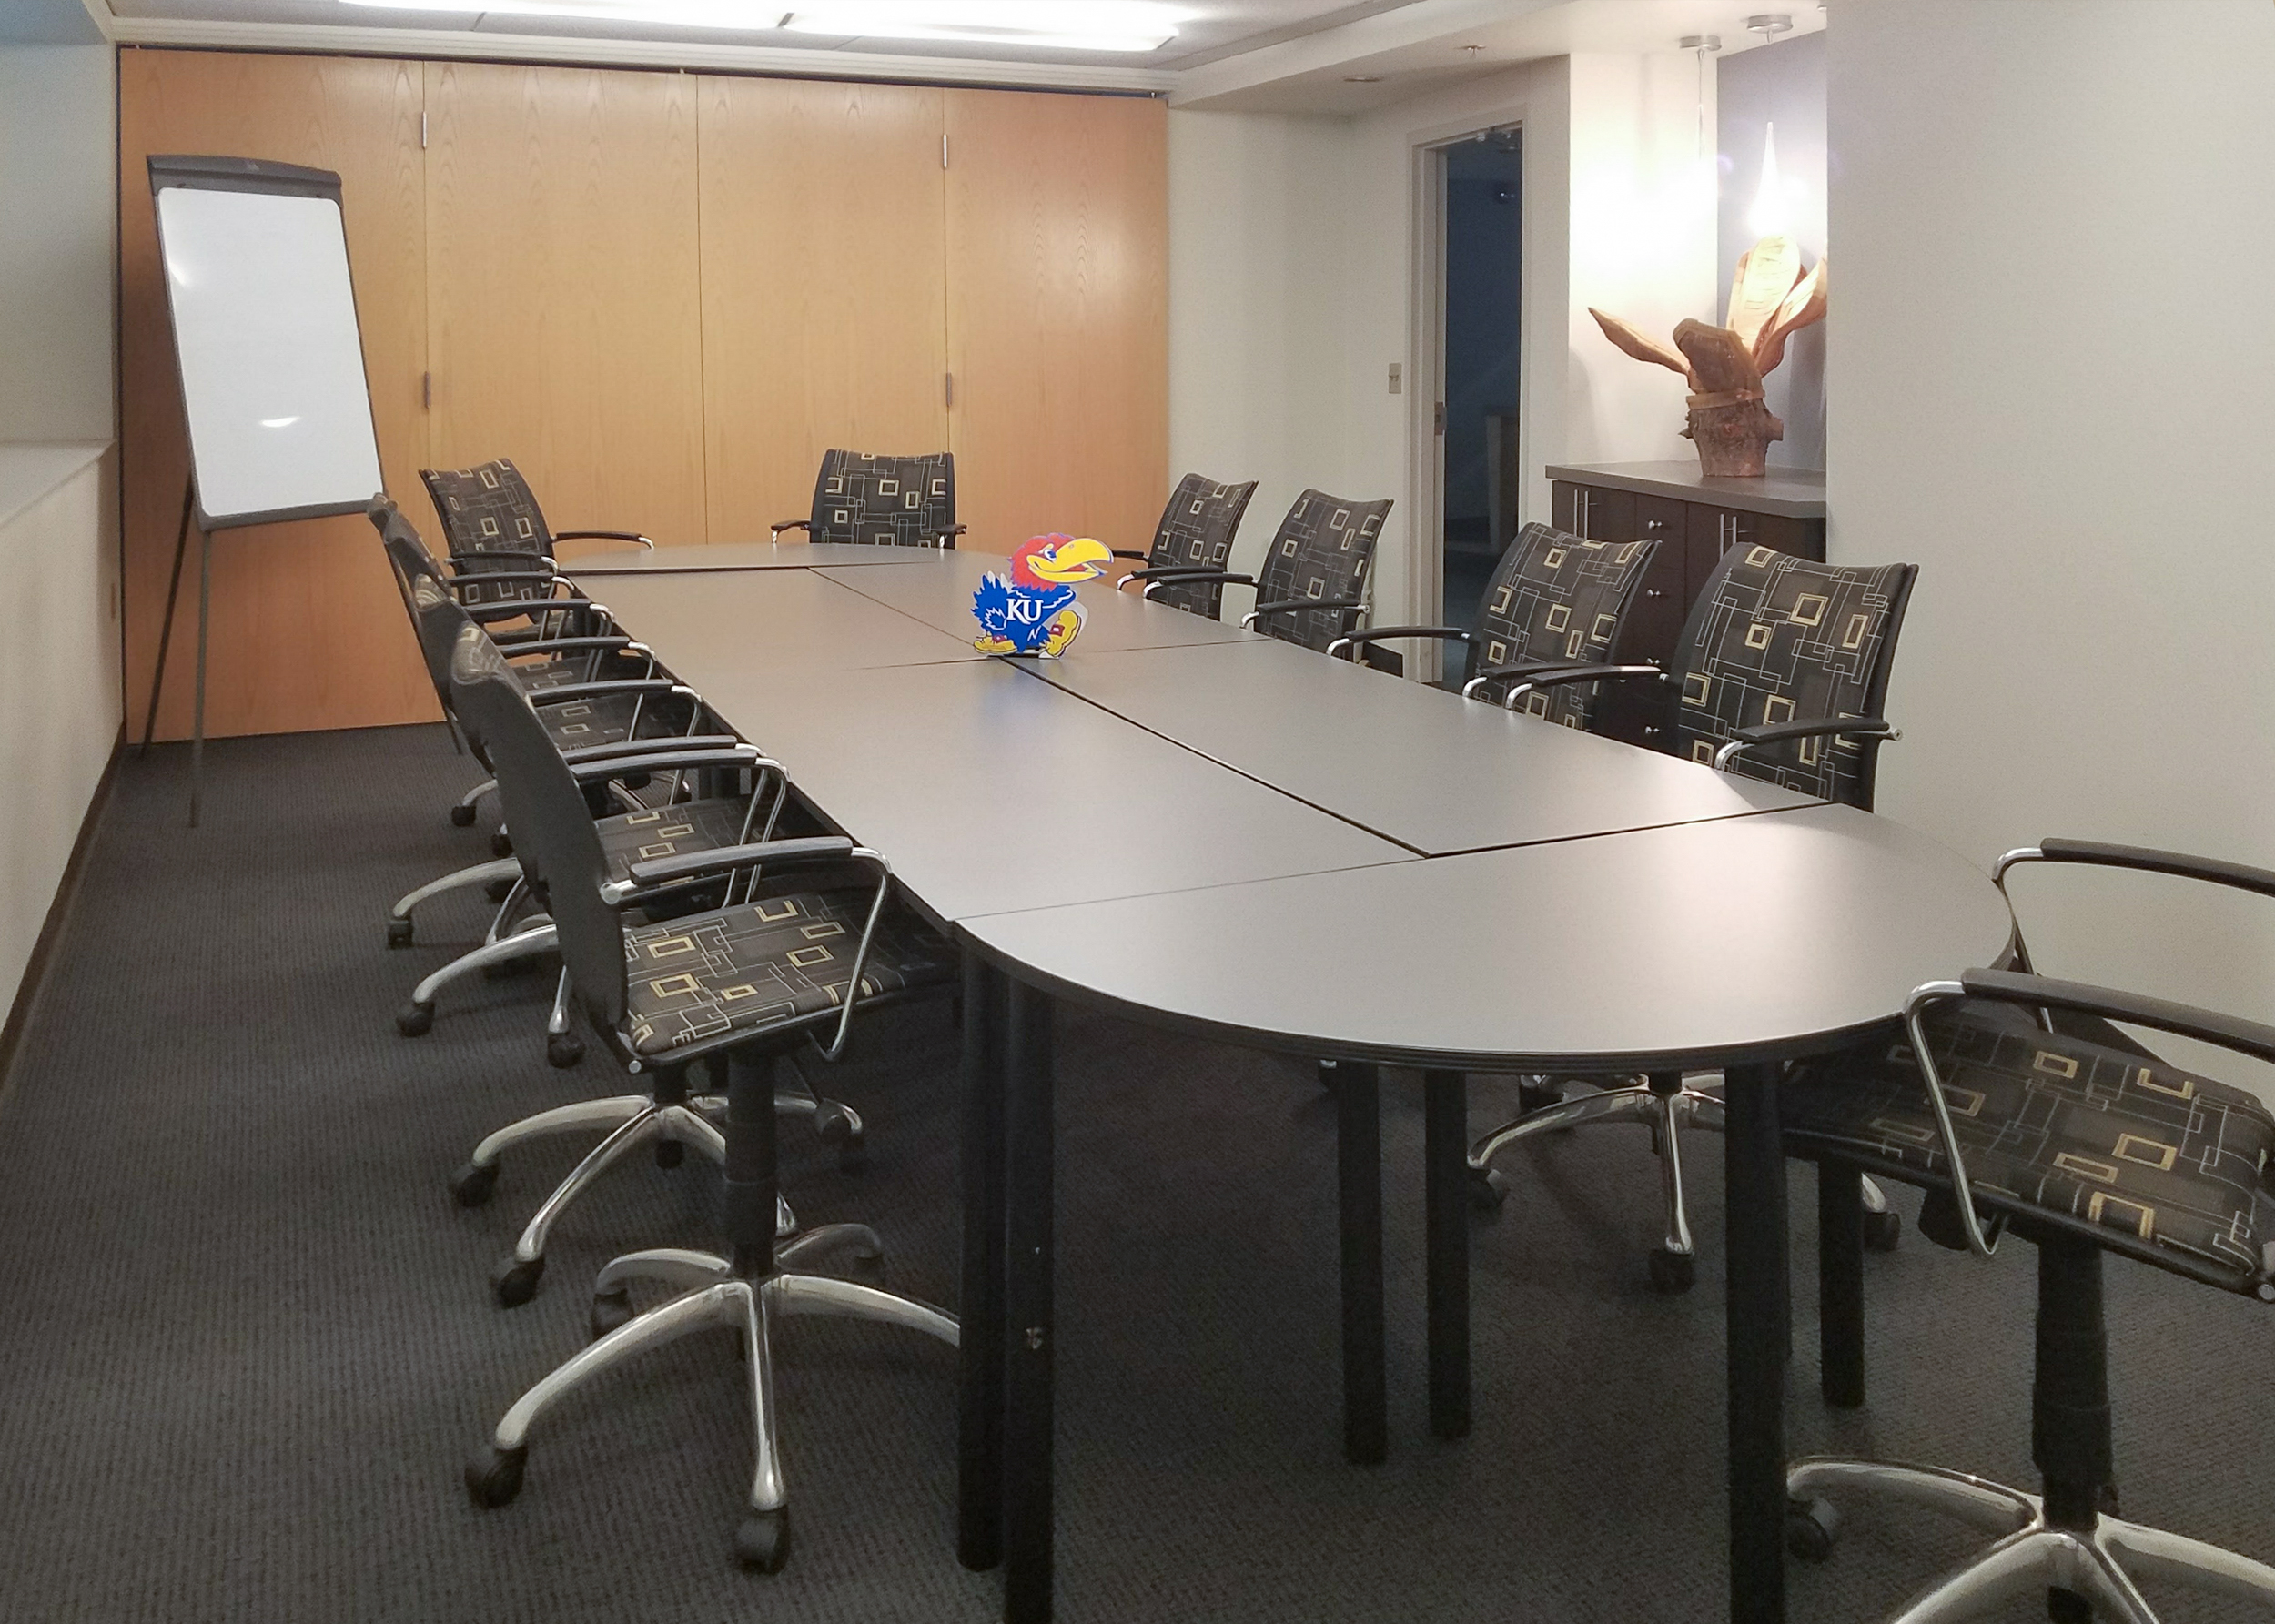 Hashinger Conference Room 330 with 12 chairs and a table